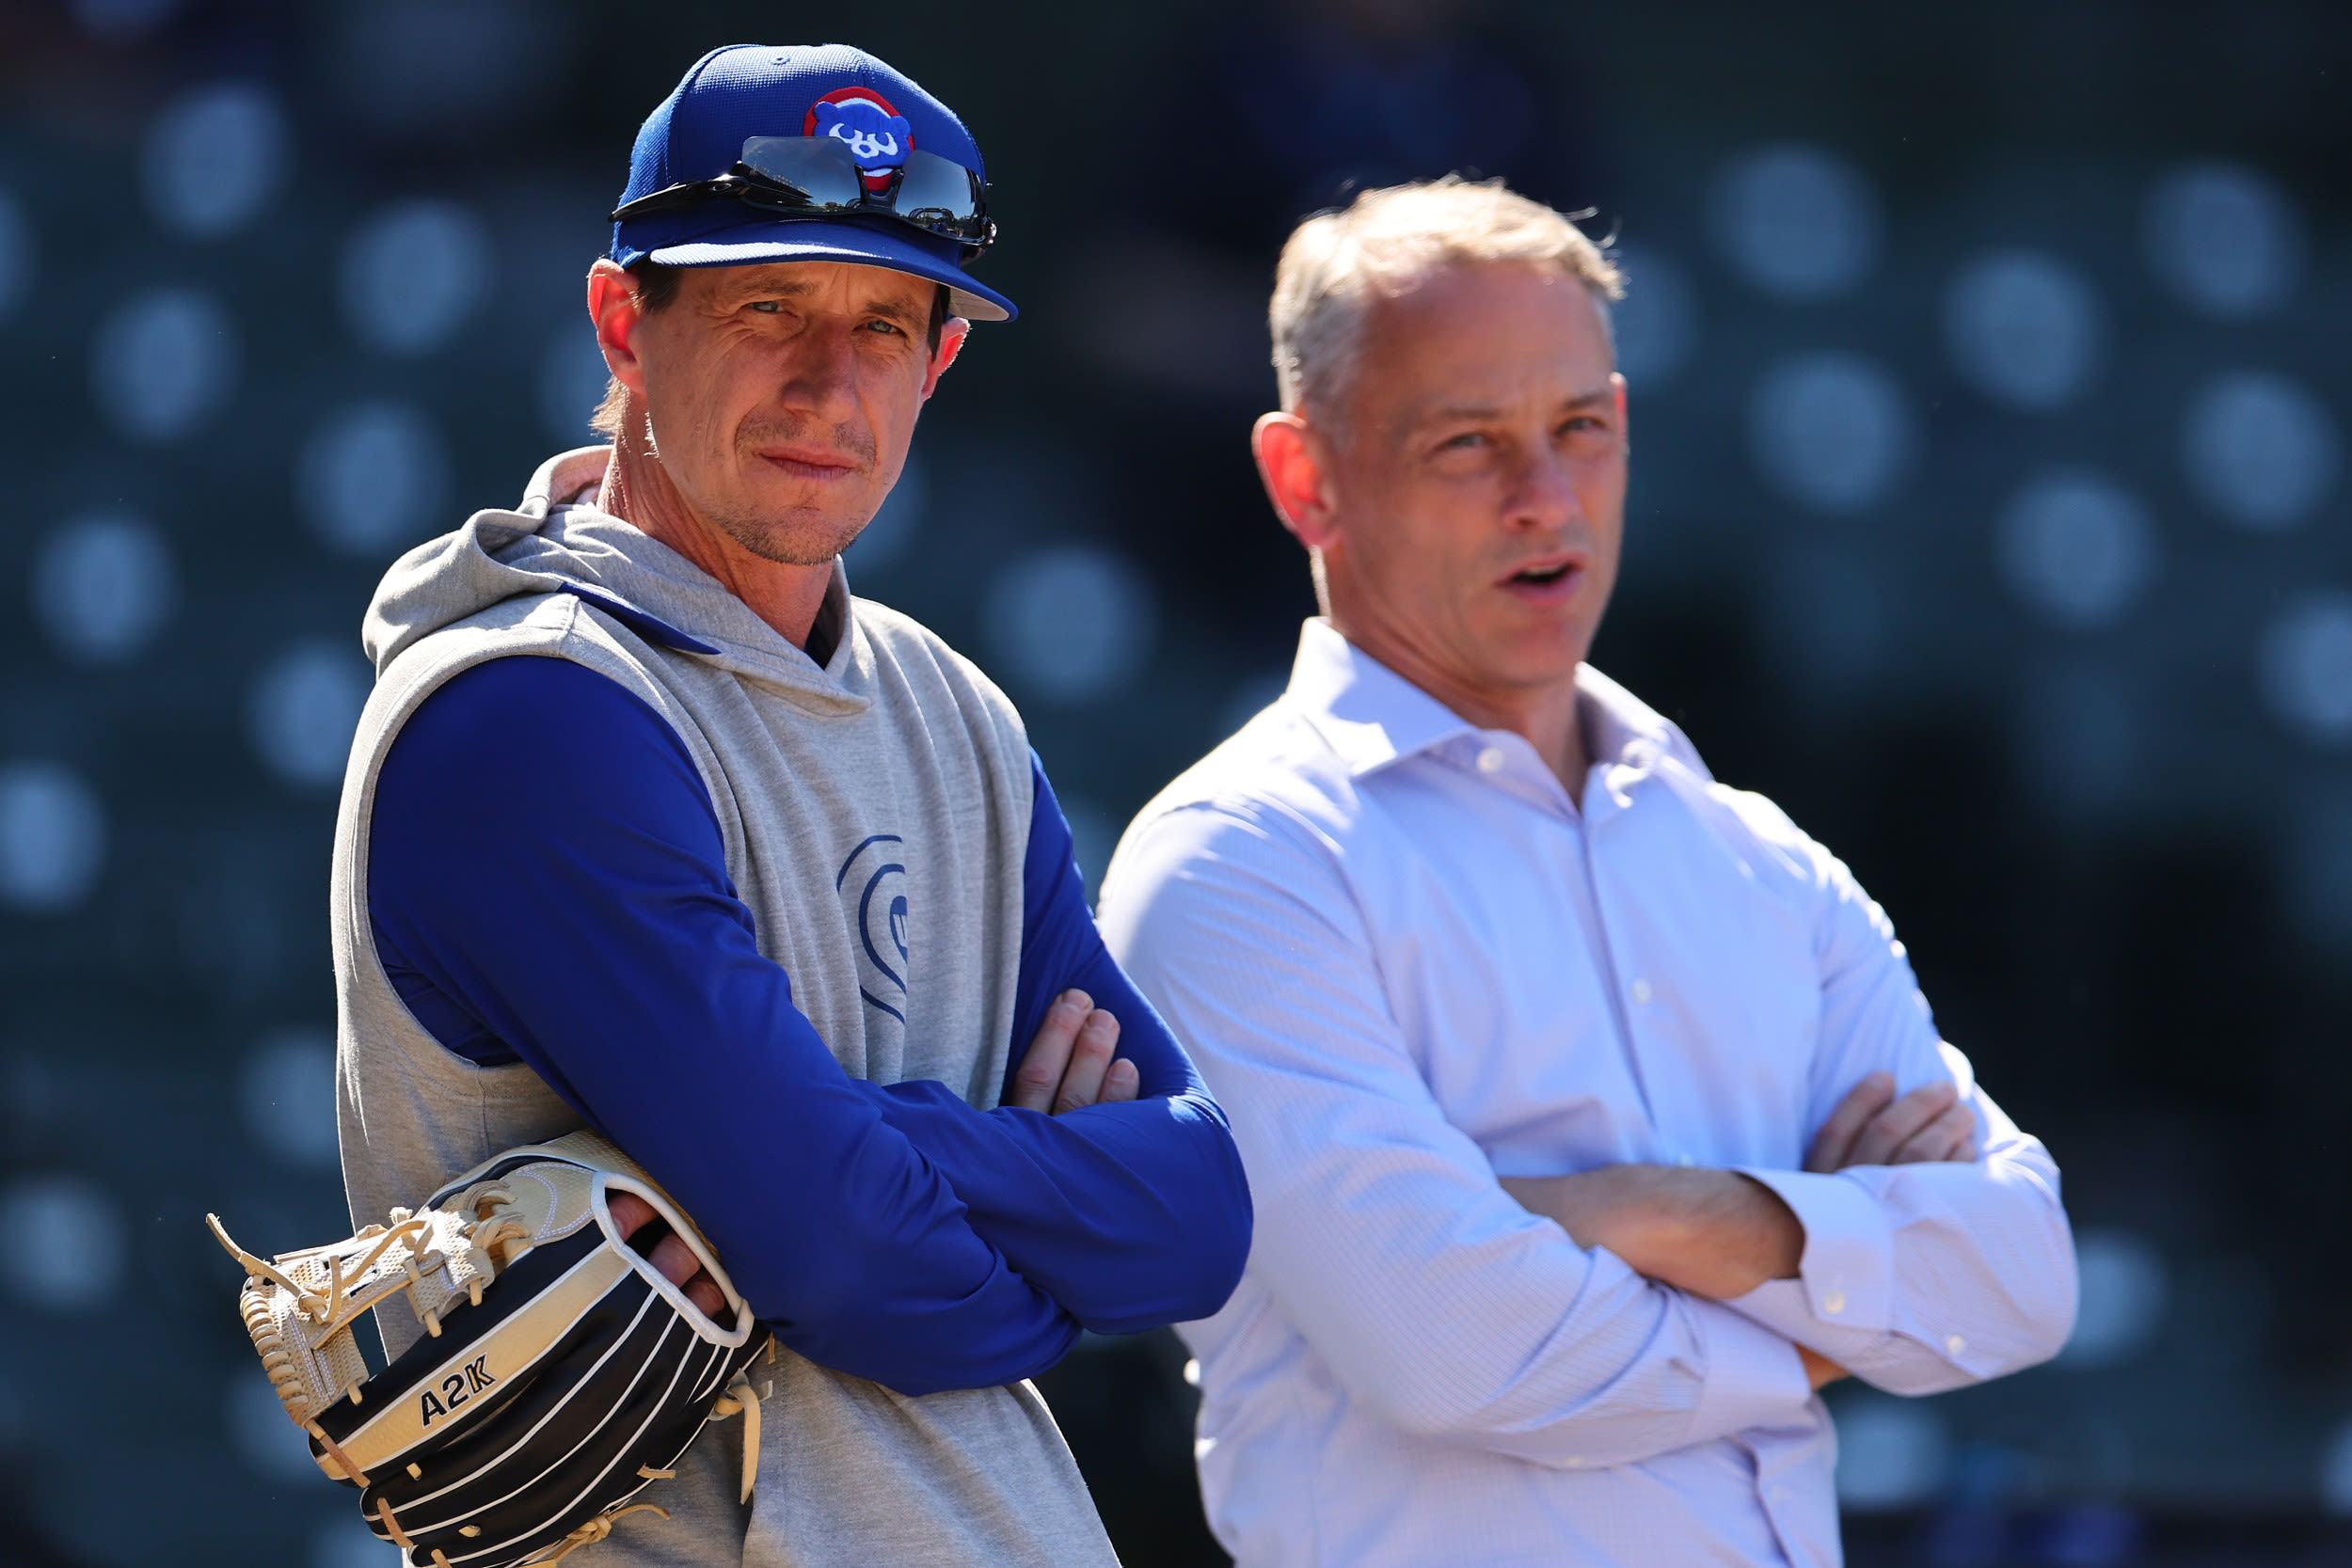 Cubs' President Reveals Chicago's Trade Deadline Plan — And It's a Surprise